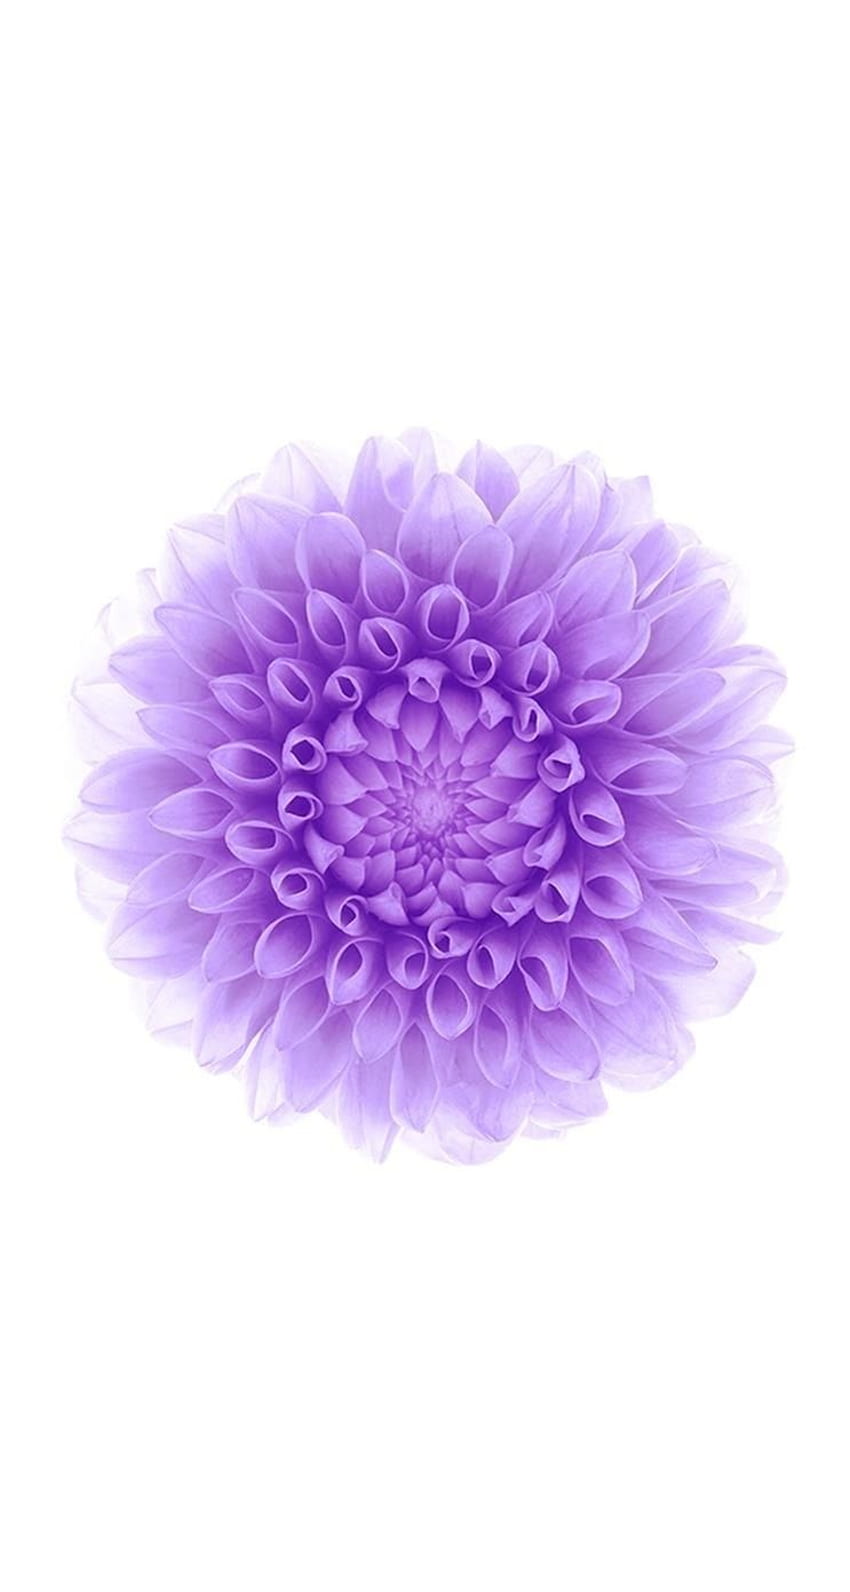 All 15 from iOS 8 Right Now « iOS & iPhone, Dark Purple Flower HD phone wallpaper